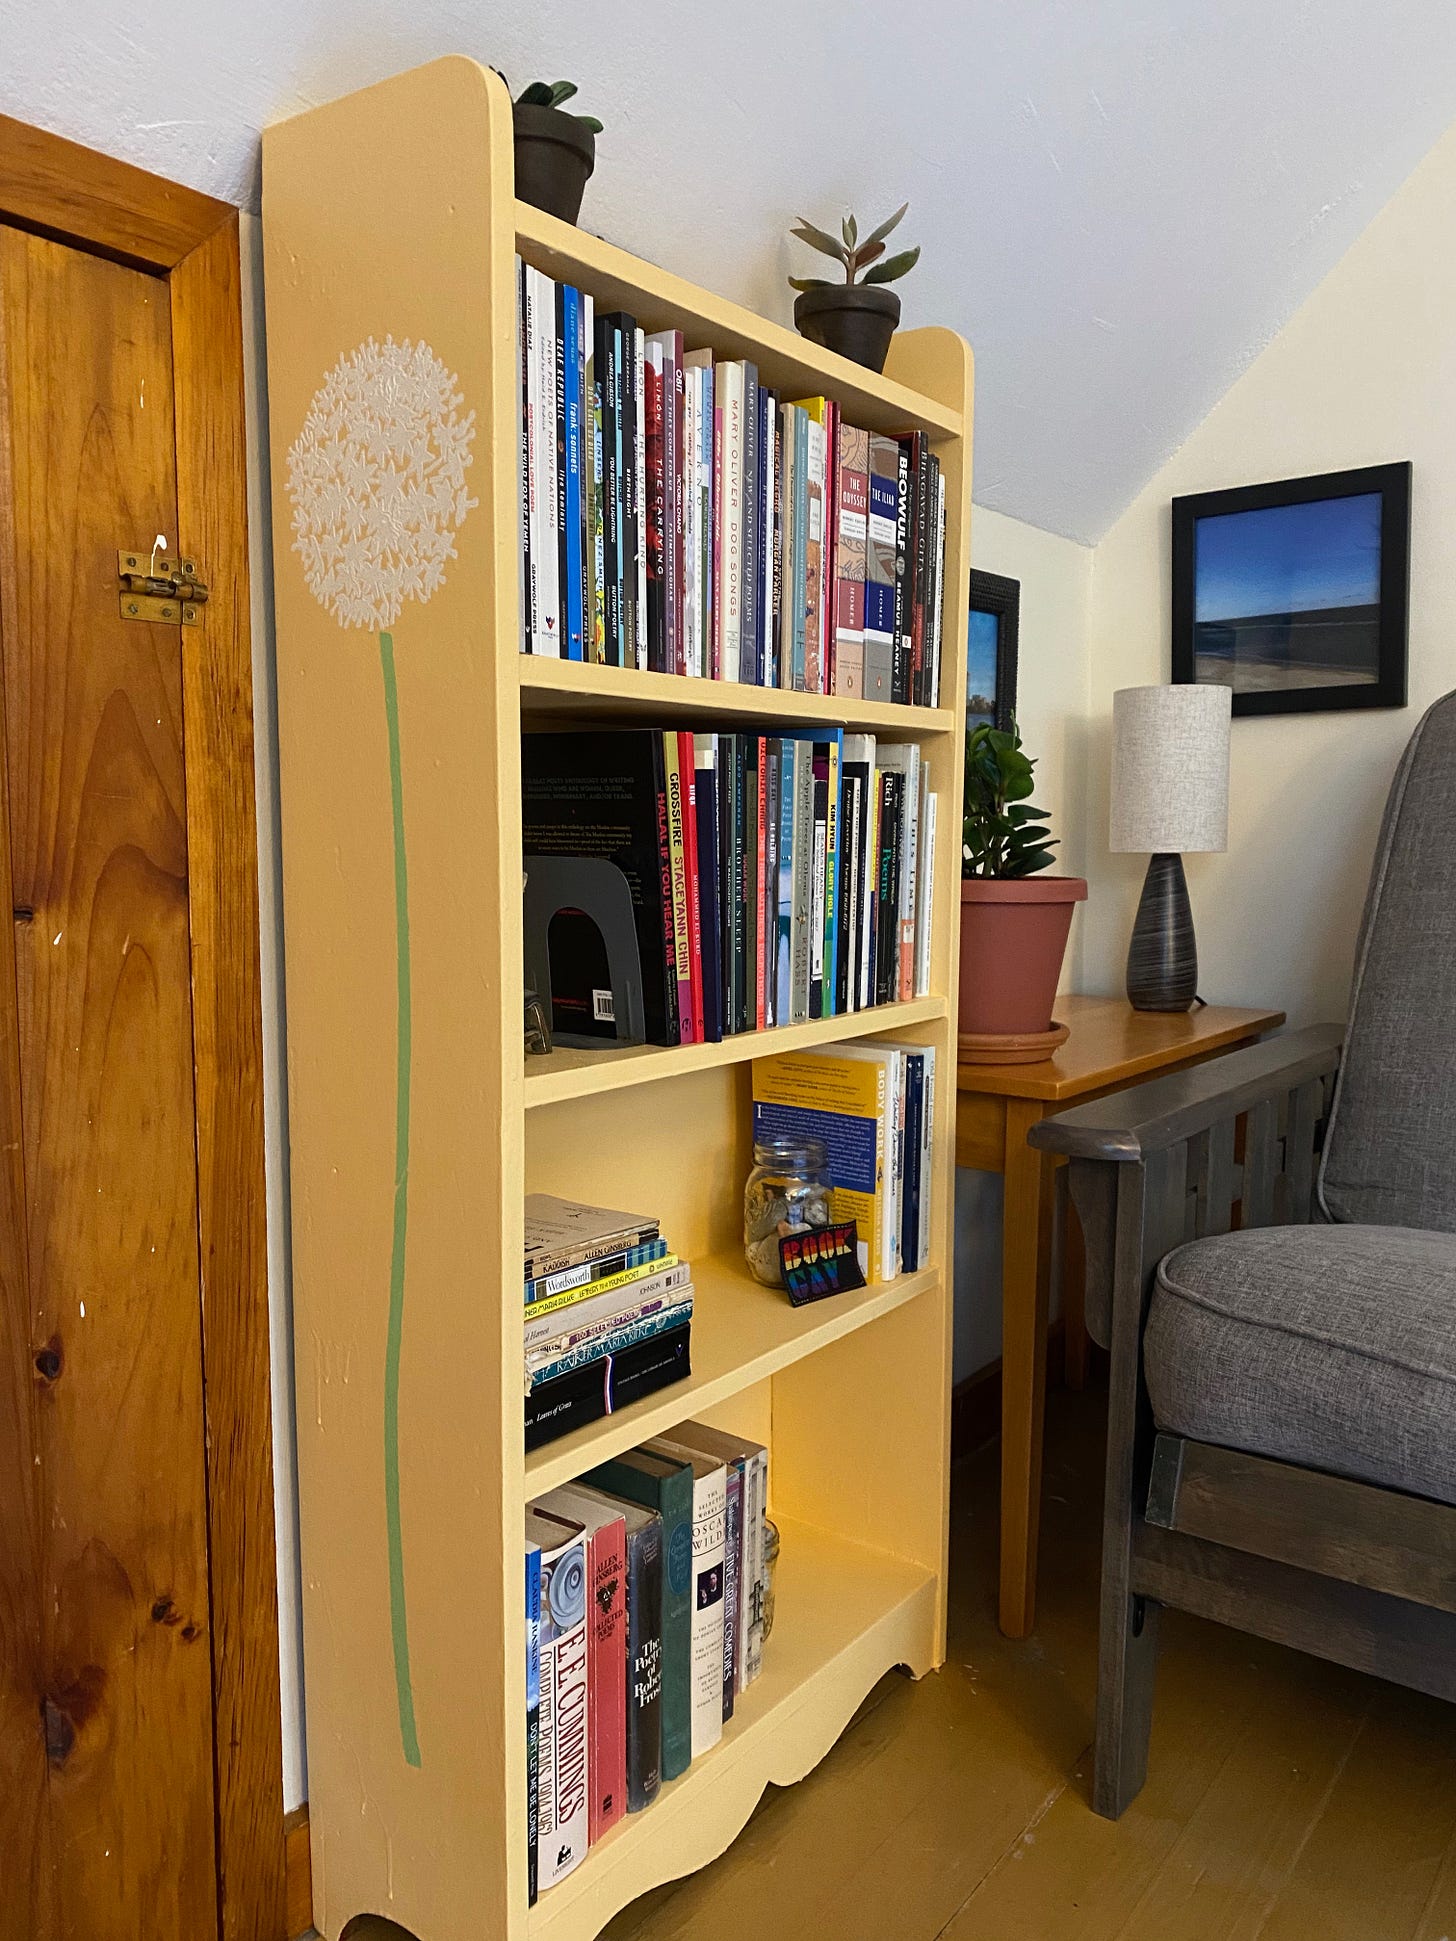 A small yellowy-orange bookshelf full of books and plants in the corner of a room. A large allium flower, with a green stem and white head, is stenciled onto the side of the bookshelf.